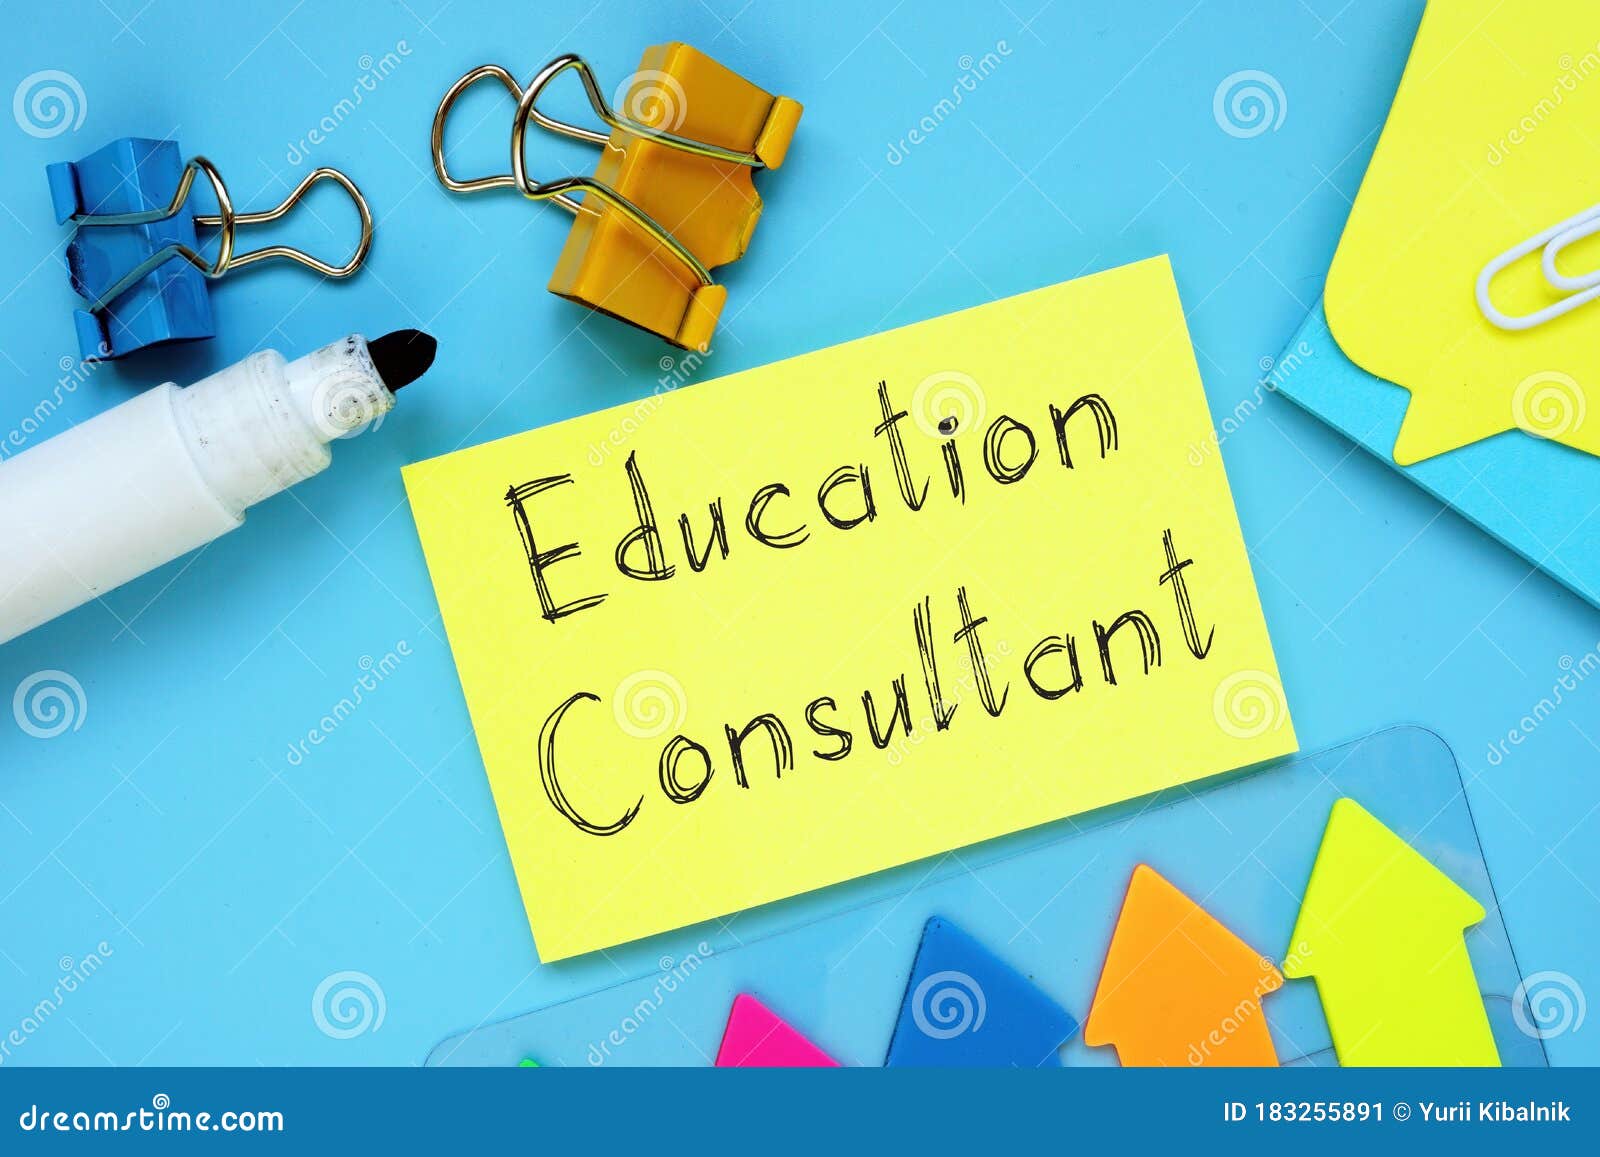 educational concept meaning education consultant with inscription on the piece of paper